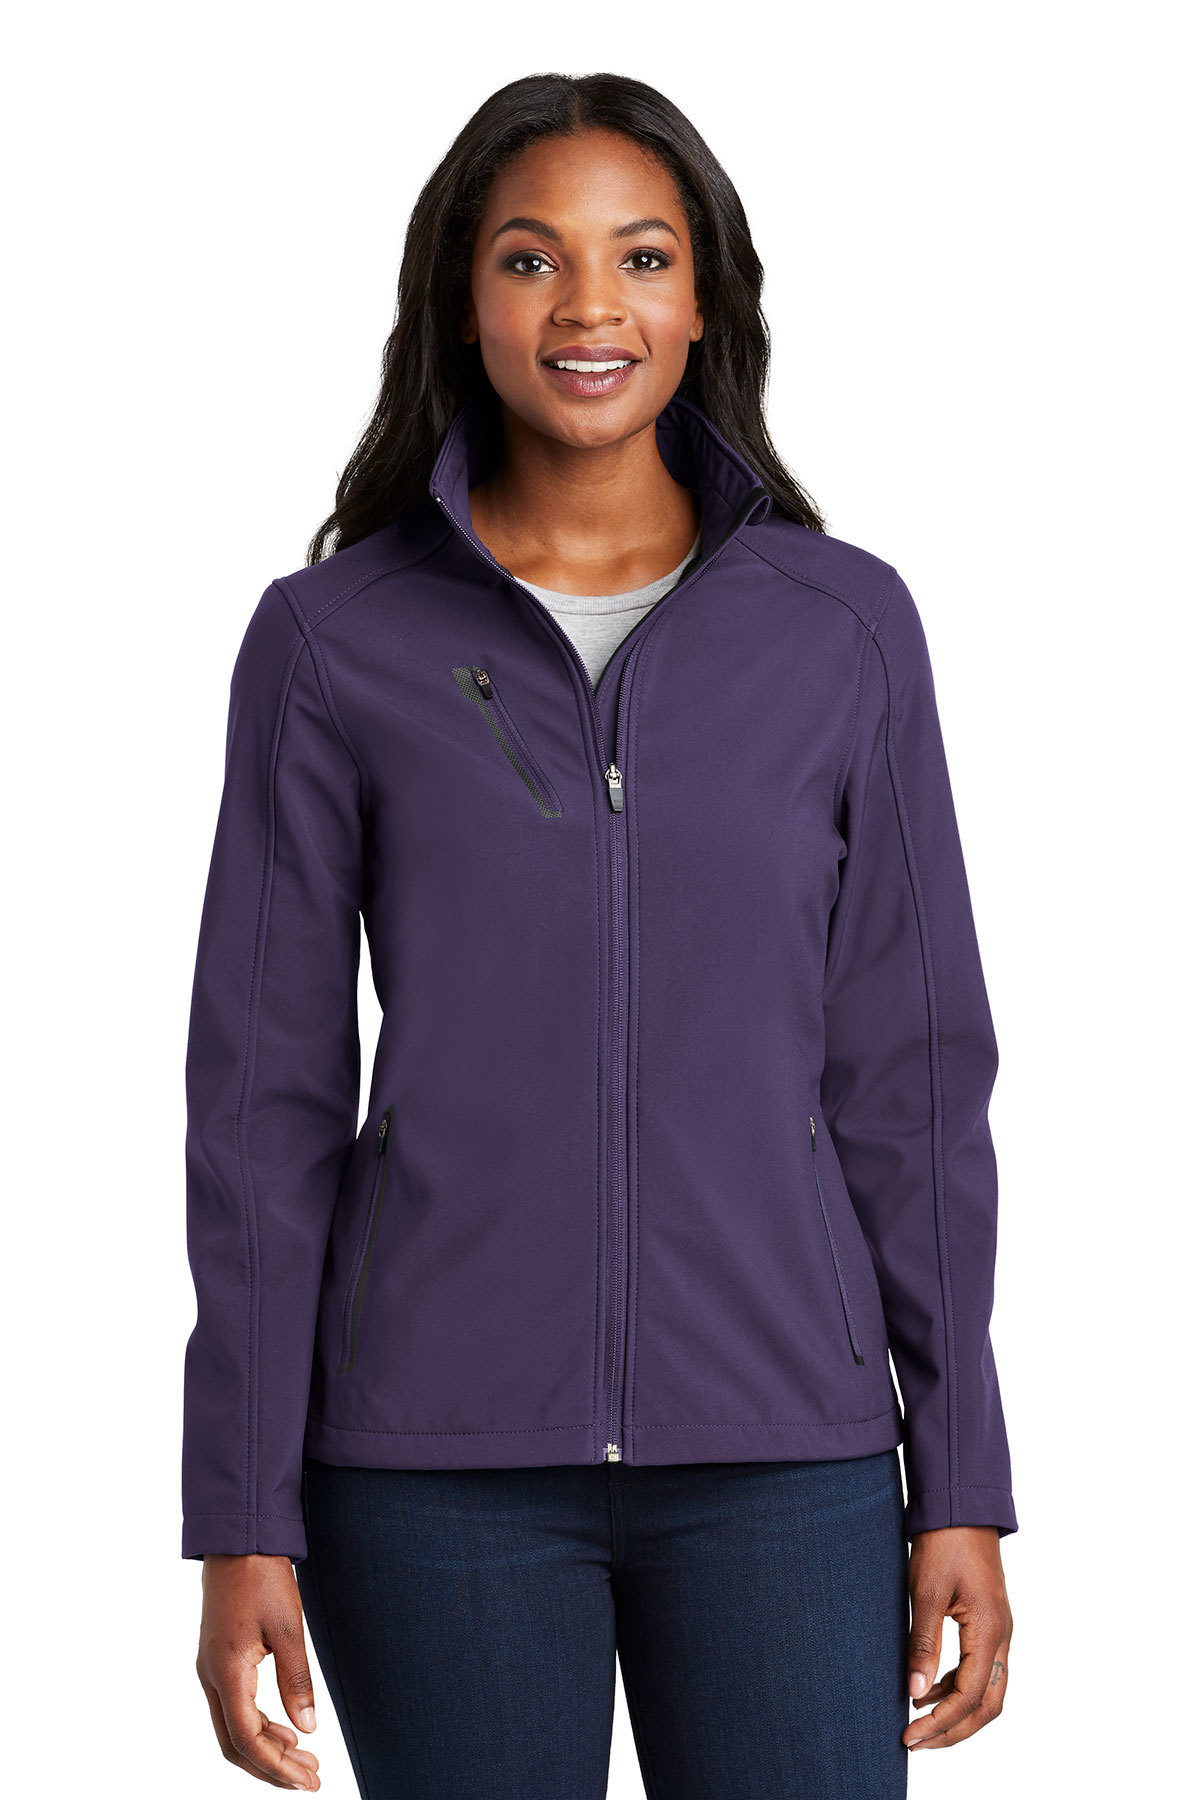 Port Authority Ladies Welded Soft Shell Jacket, Product